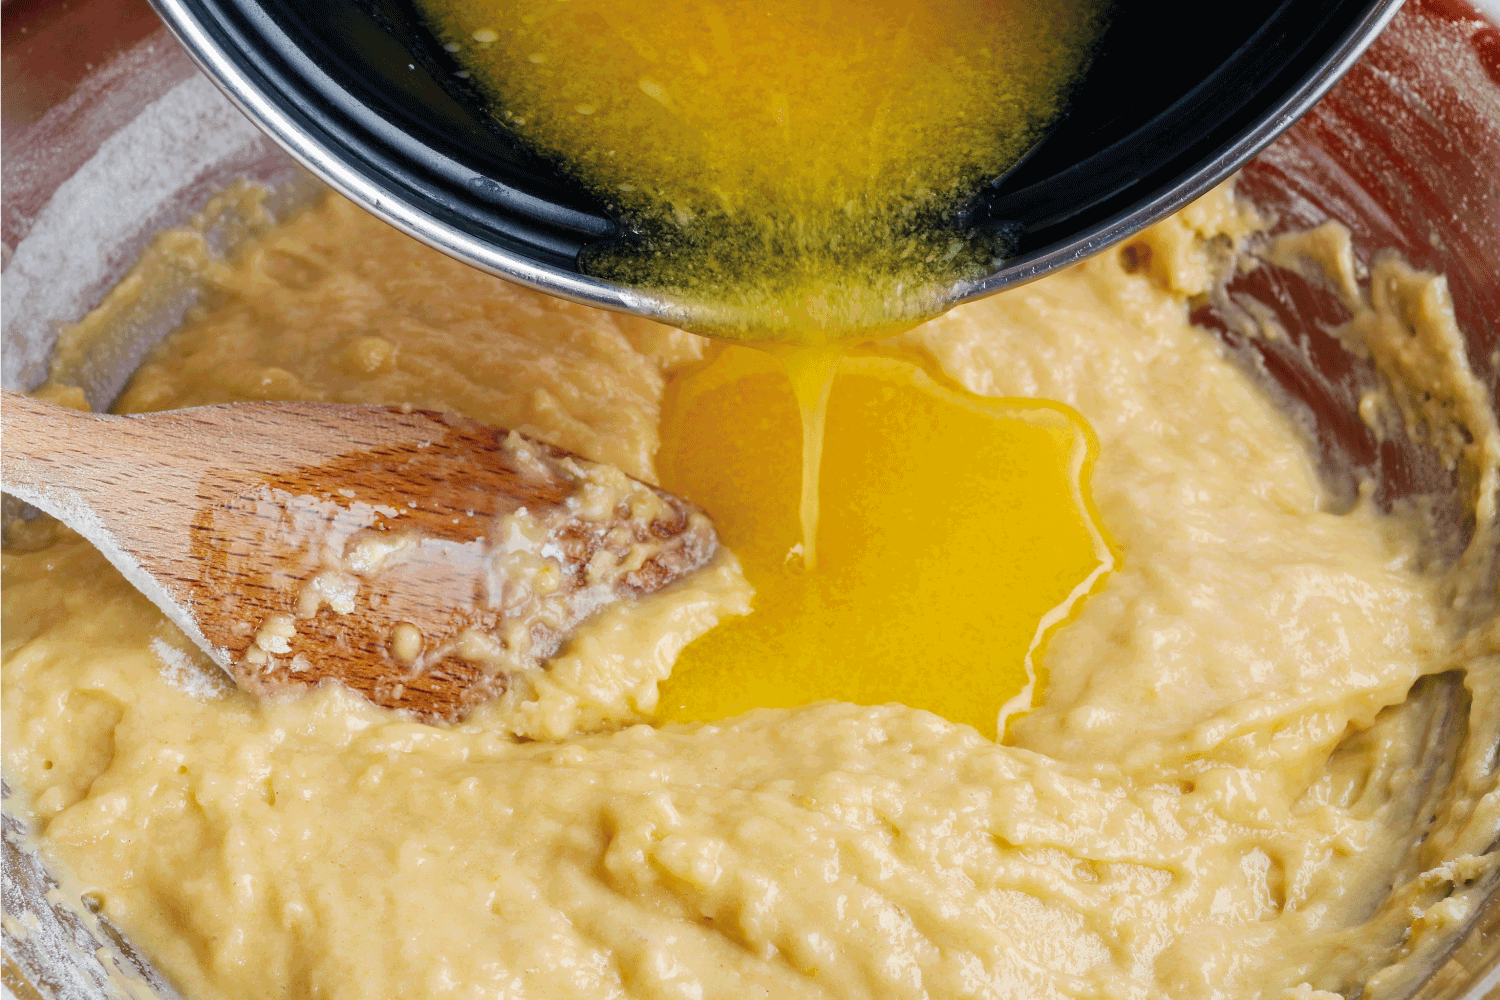 How to make yeast dough, step by step, add melted butter to mixture